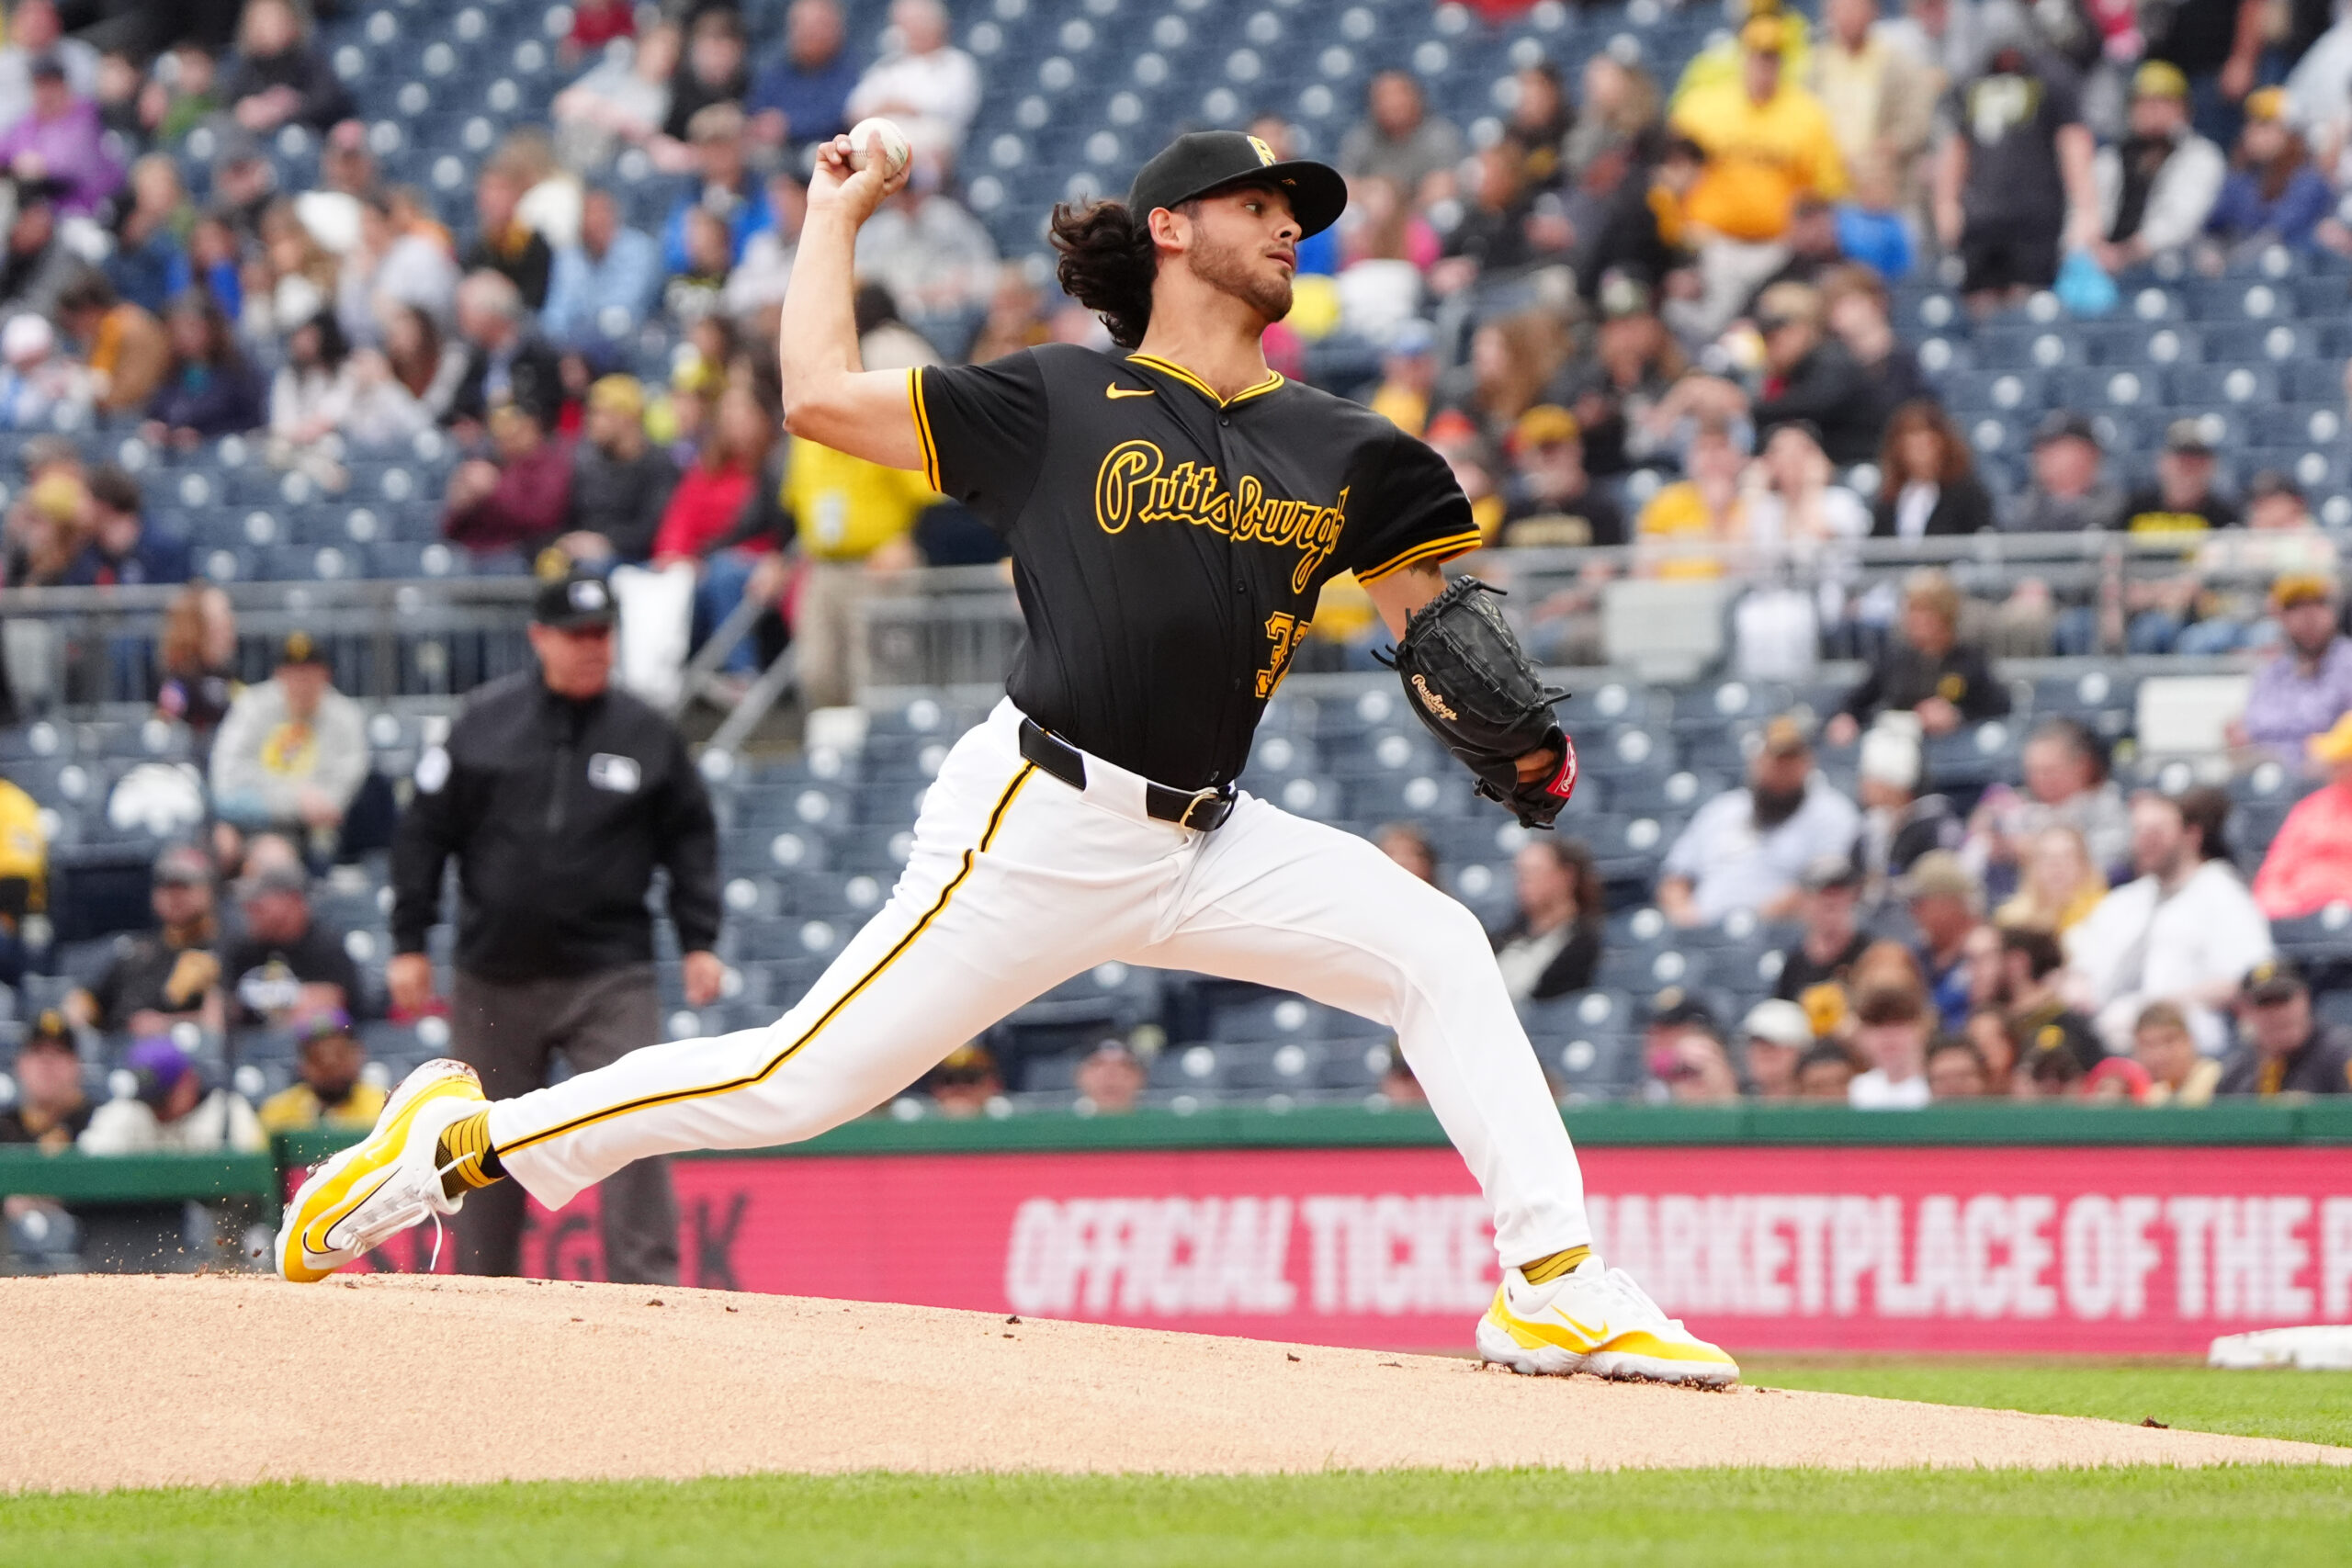 Pirates Rookie Pitcher Dominant In Historic Performance